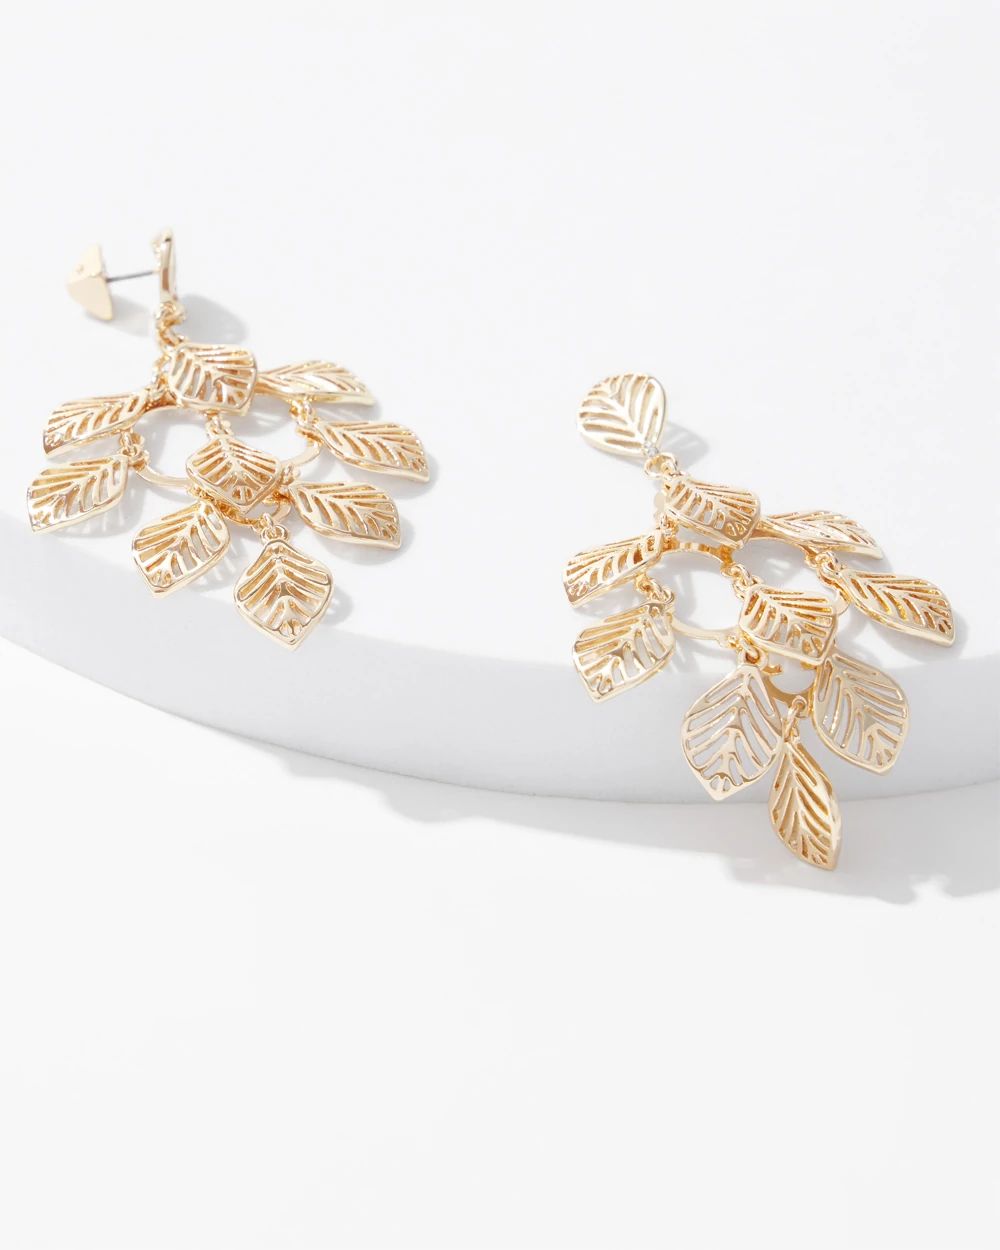 Gold Leaf Statement Earrings click to view larger image.